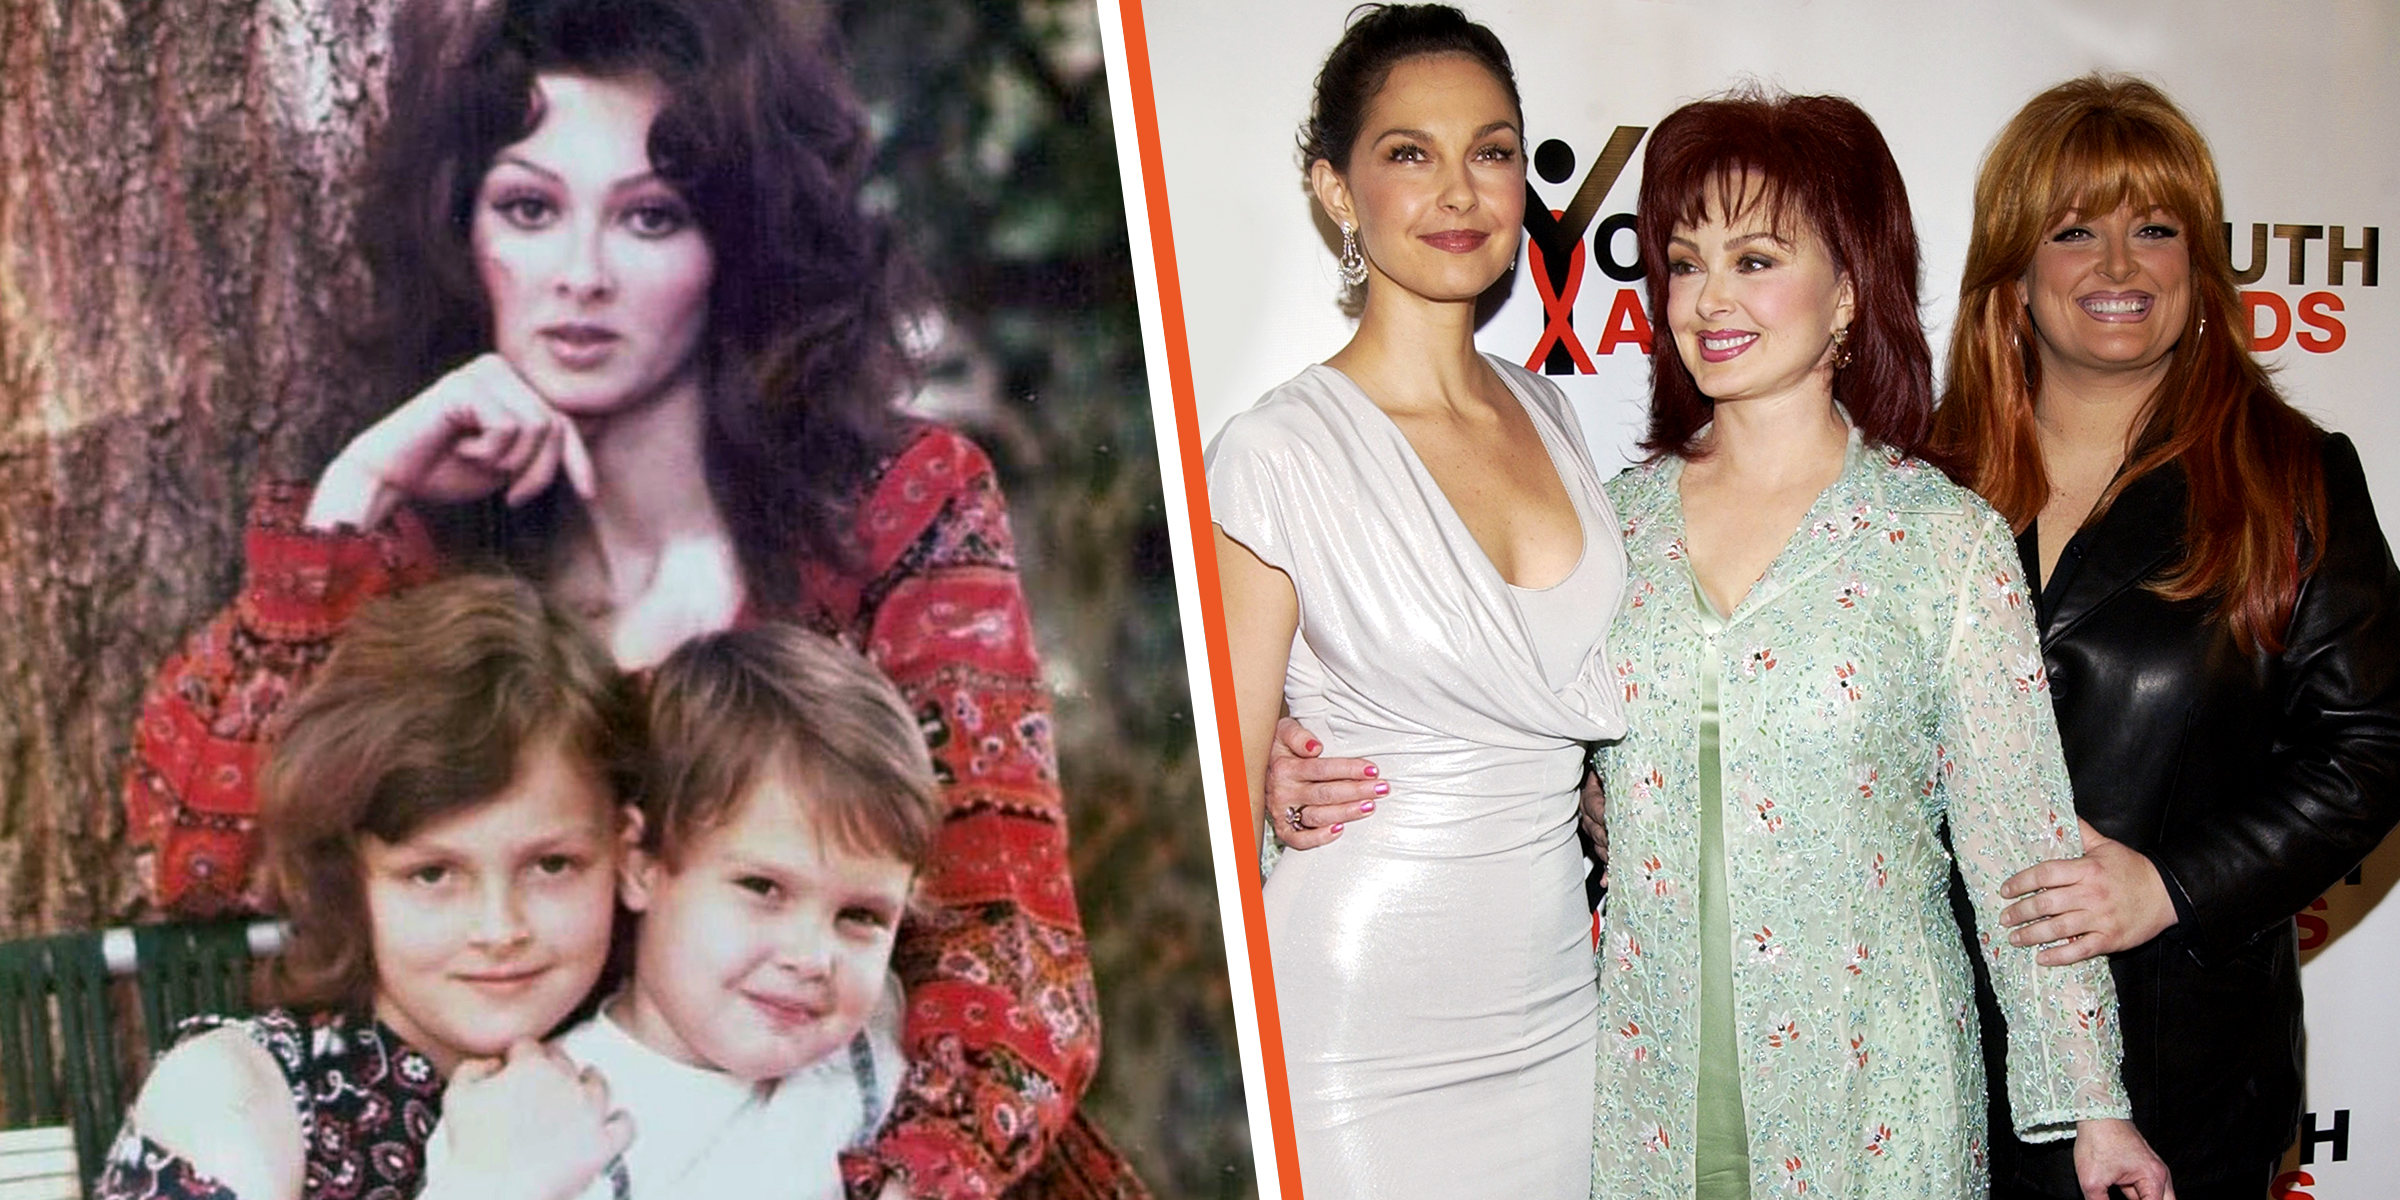 Naomi Judd and her daughters, Wynonna and Ashley | Naomi Judd and her grown up daughters Wynnona and Ashley | Source: instagram.com/ashley_judd Getty Images